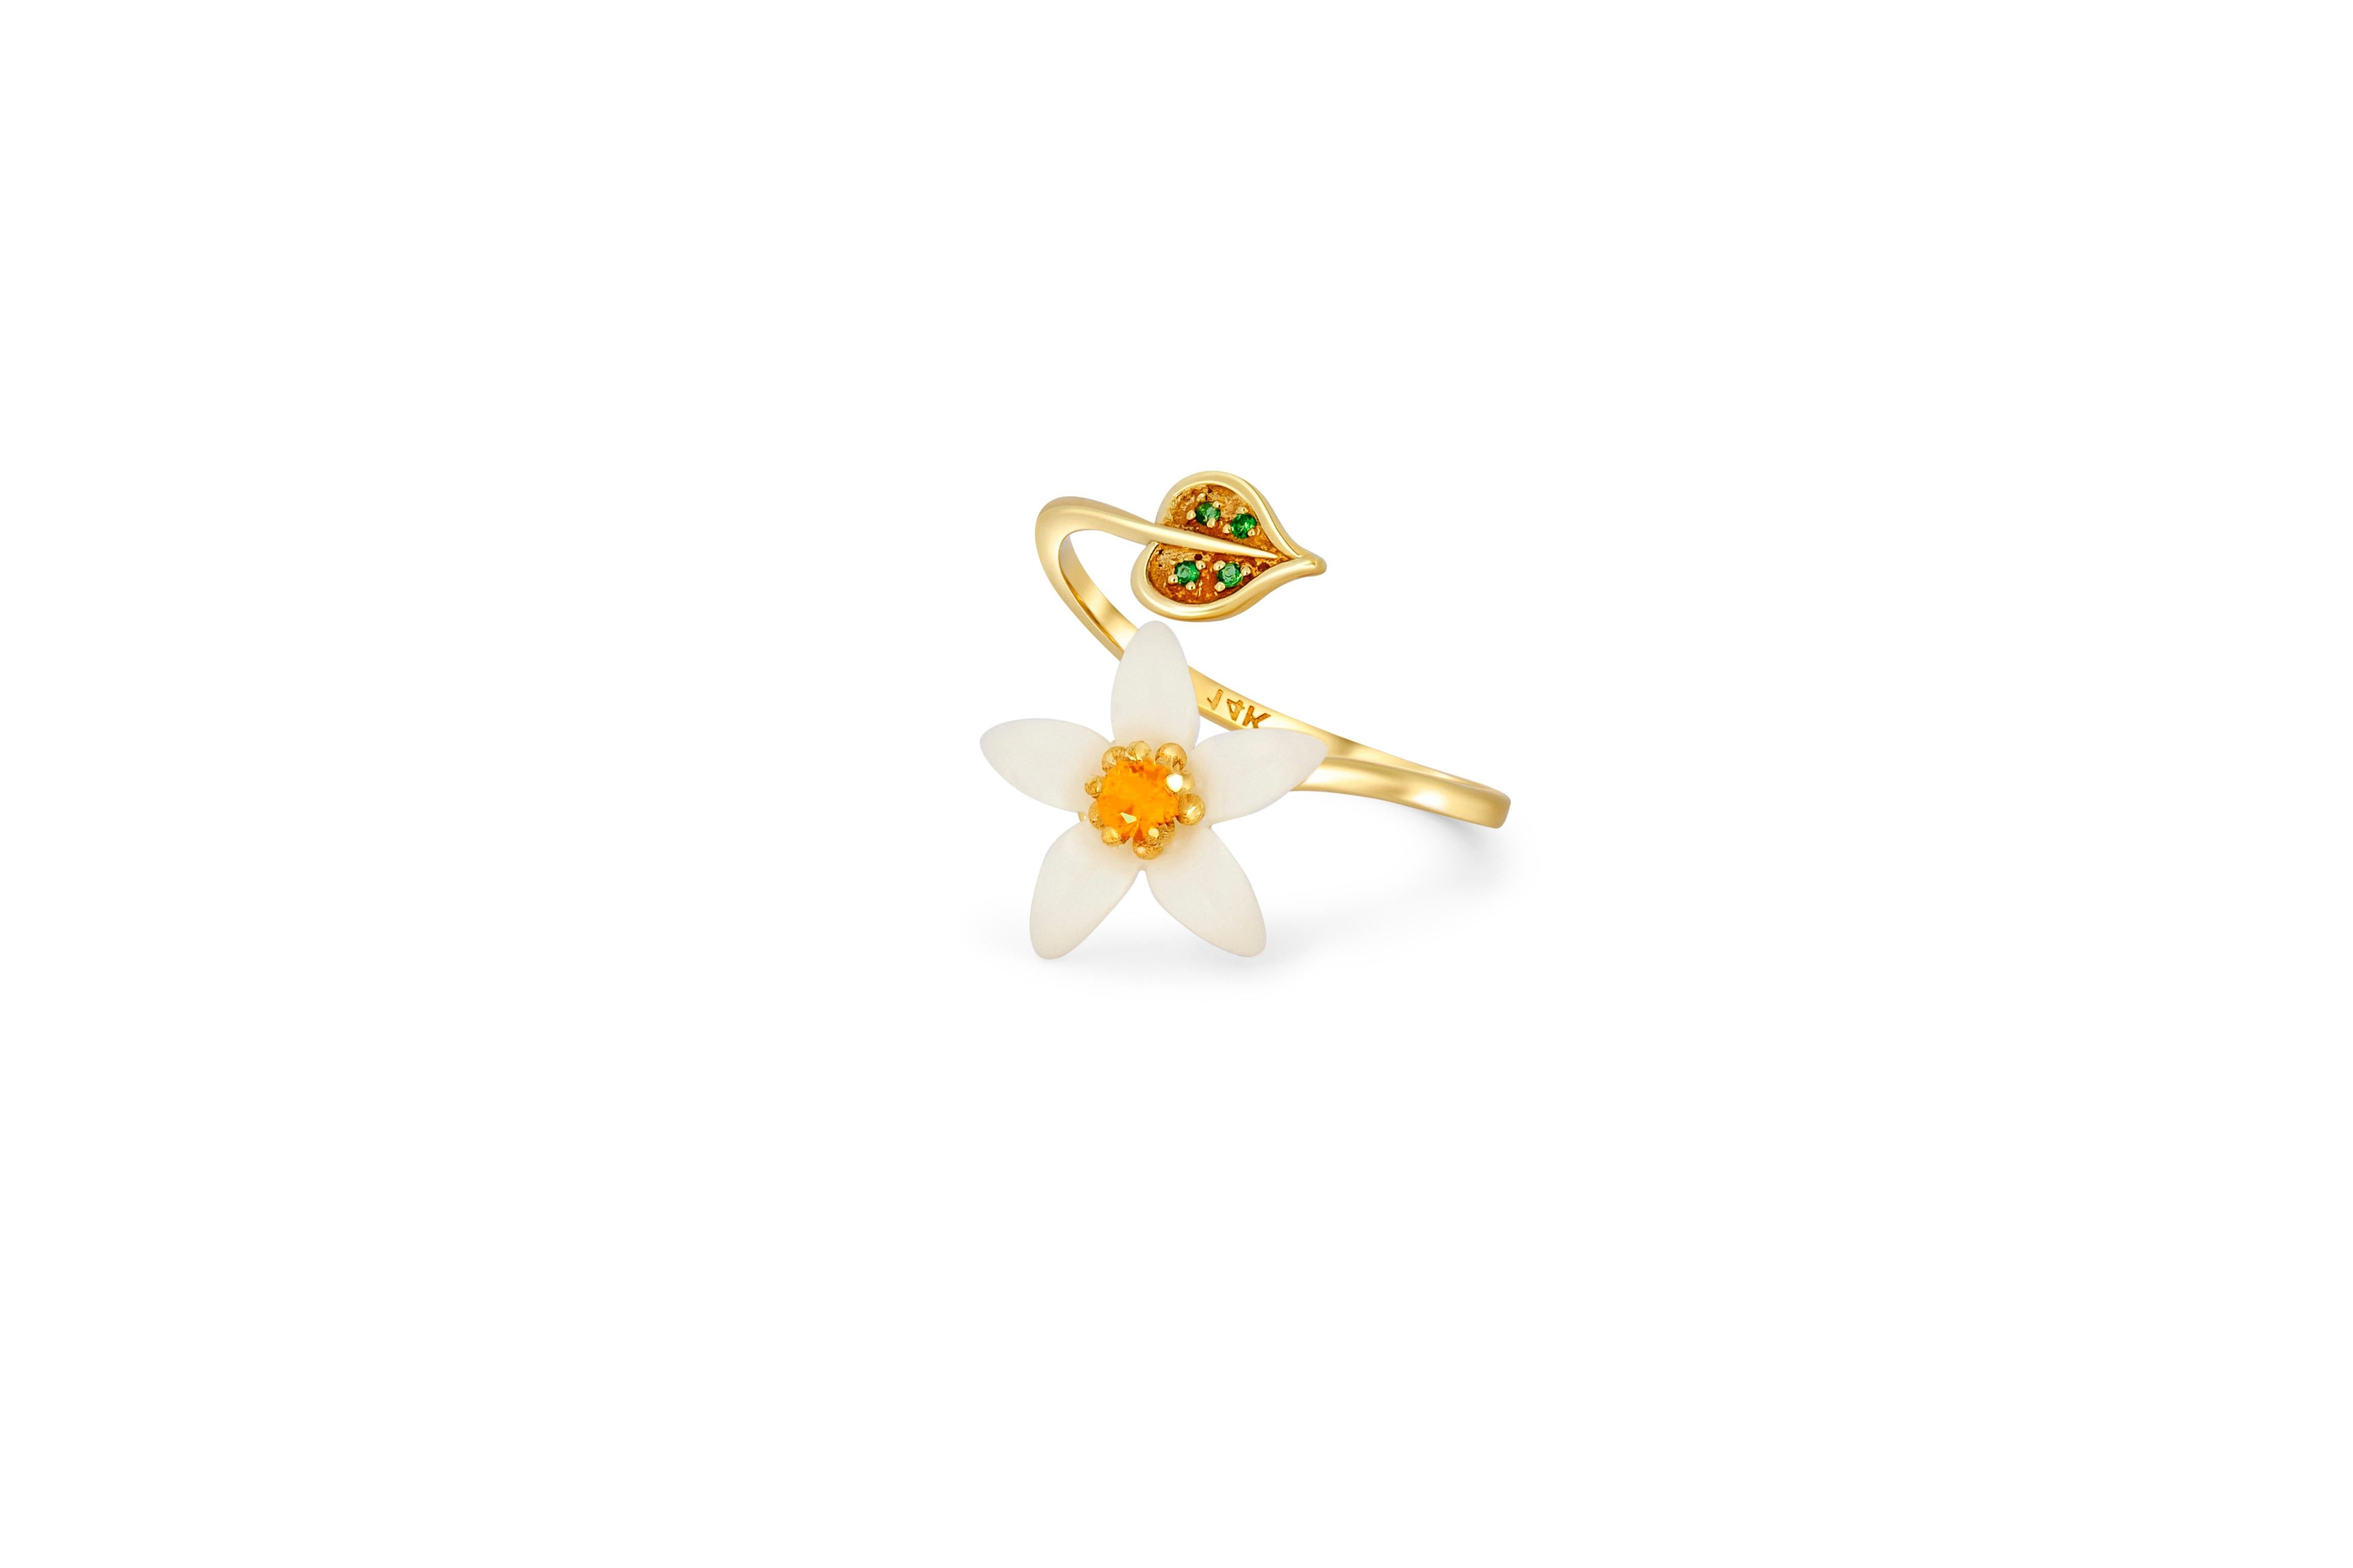 Carved Flower 14k ring with gemstones.
Open ended Lab sapphire ring in 14k gold. Adjustable ring. Carved mother of pearl flower ring. Flower gold ring. Round orange sapphire vintage ring. Nature inspired ring with mother of pearl flower. Shell